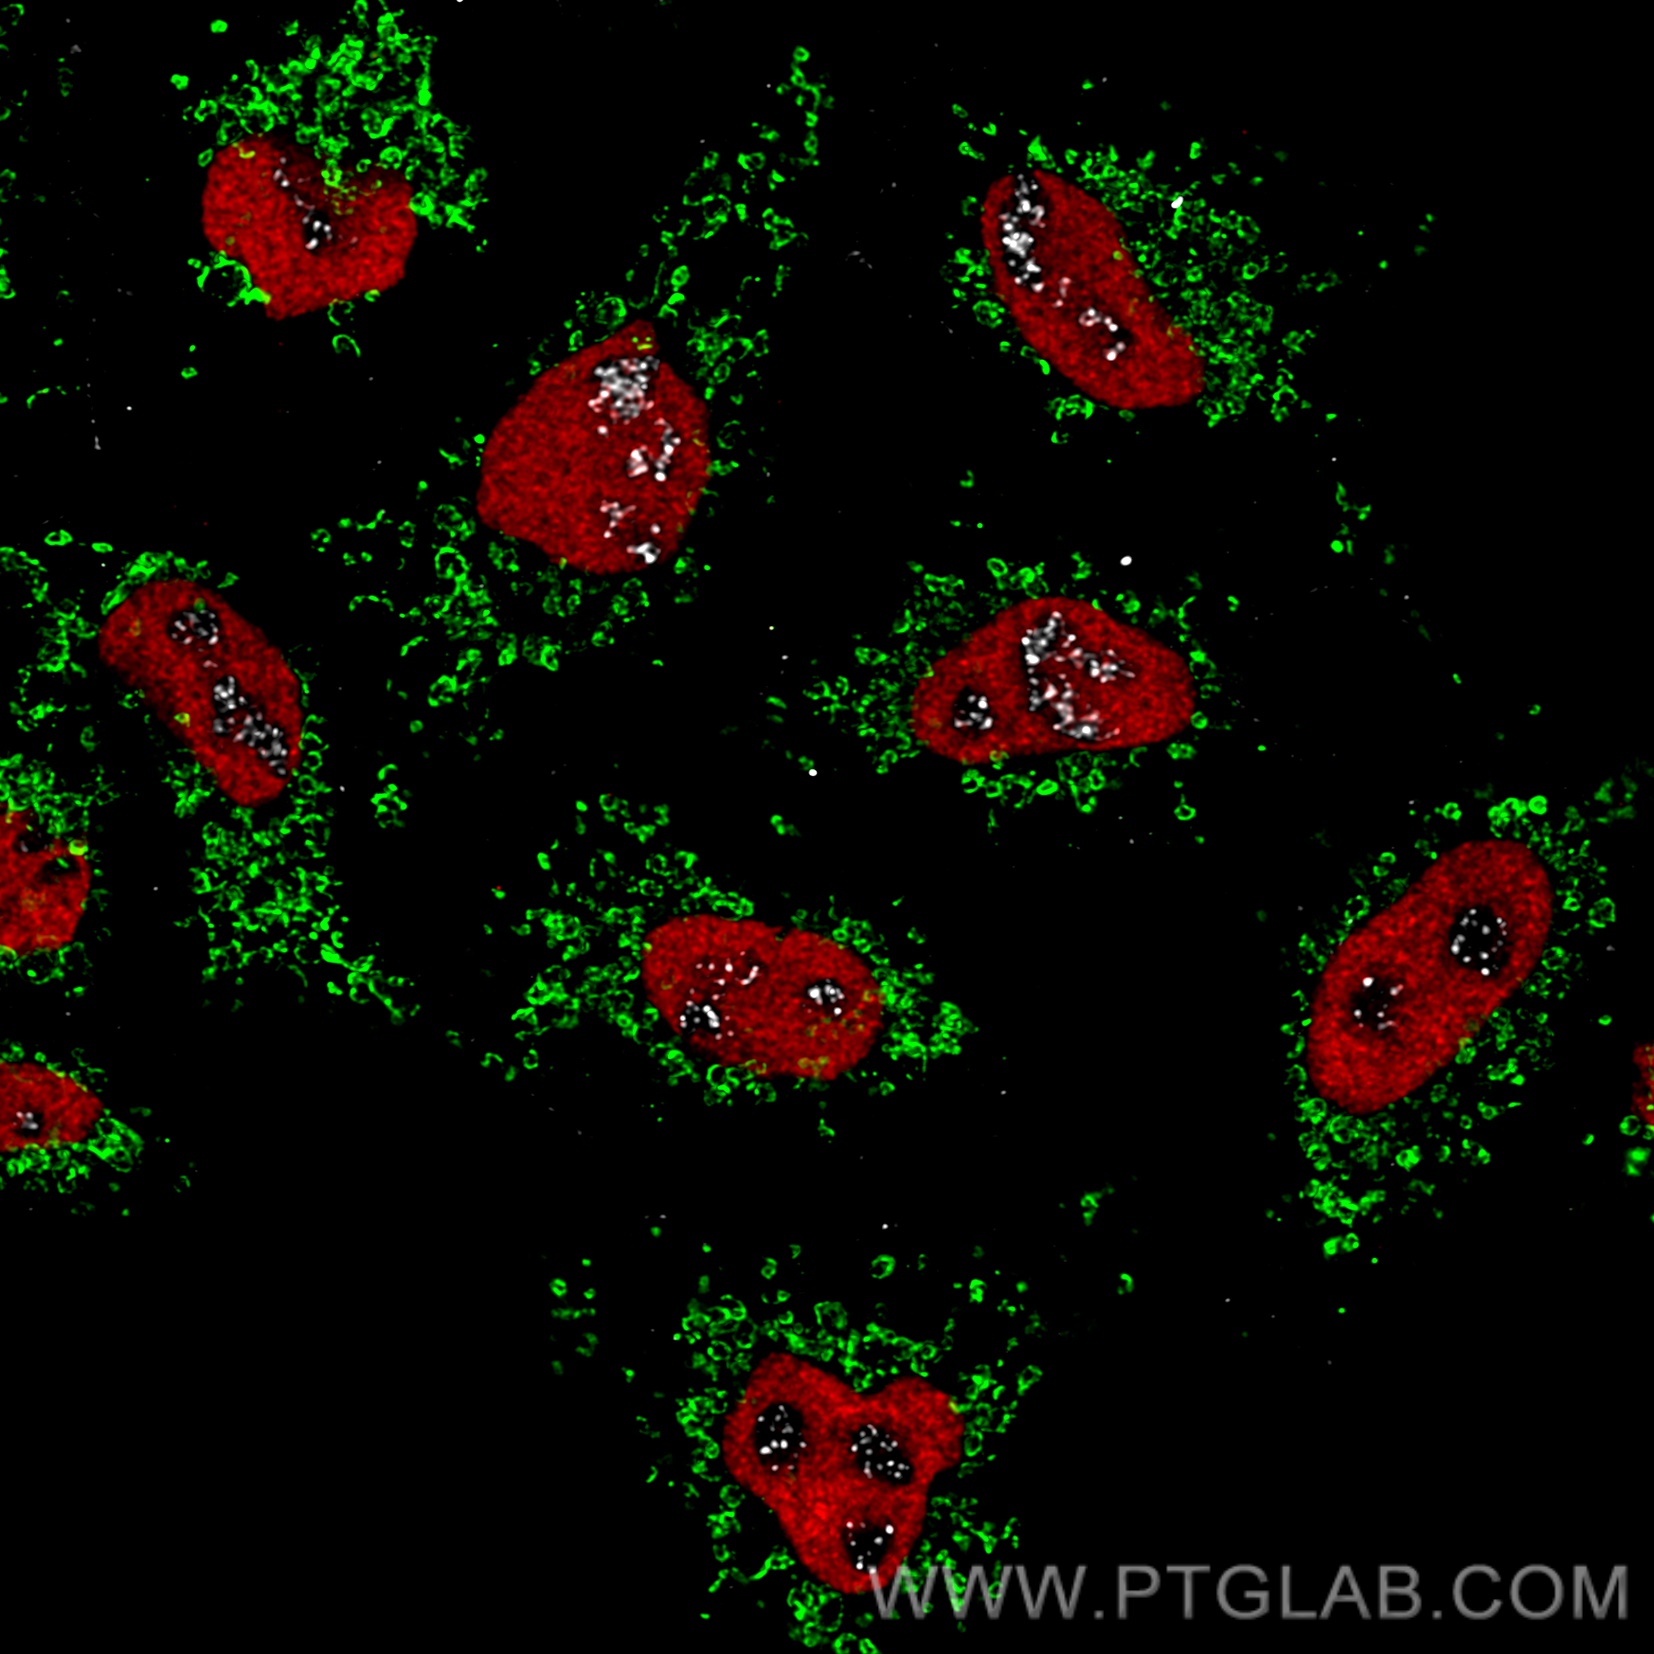 Immunofluorescence of HeLa: PFA-fixed HeLa cells were stained with CoraLite® 488-conjugated Tom20 antibody (CL488-66777, green), anti-HDAC2 (67165-1-Ig) labeled with FlexAble CoraLite® Plus 555 Kit (KFA062, red) and anti- PAF49 antibody labeled with FlexAble ​CoraLite® Plus 647 Kit (KFA063, grey). Confocal images were acquired with a 100x oil objective and post-processed. Images were recorded at the Core Facility Bioimaging at the Biomedical Center, LMU Munich.